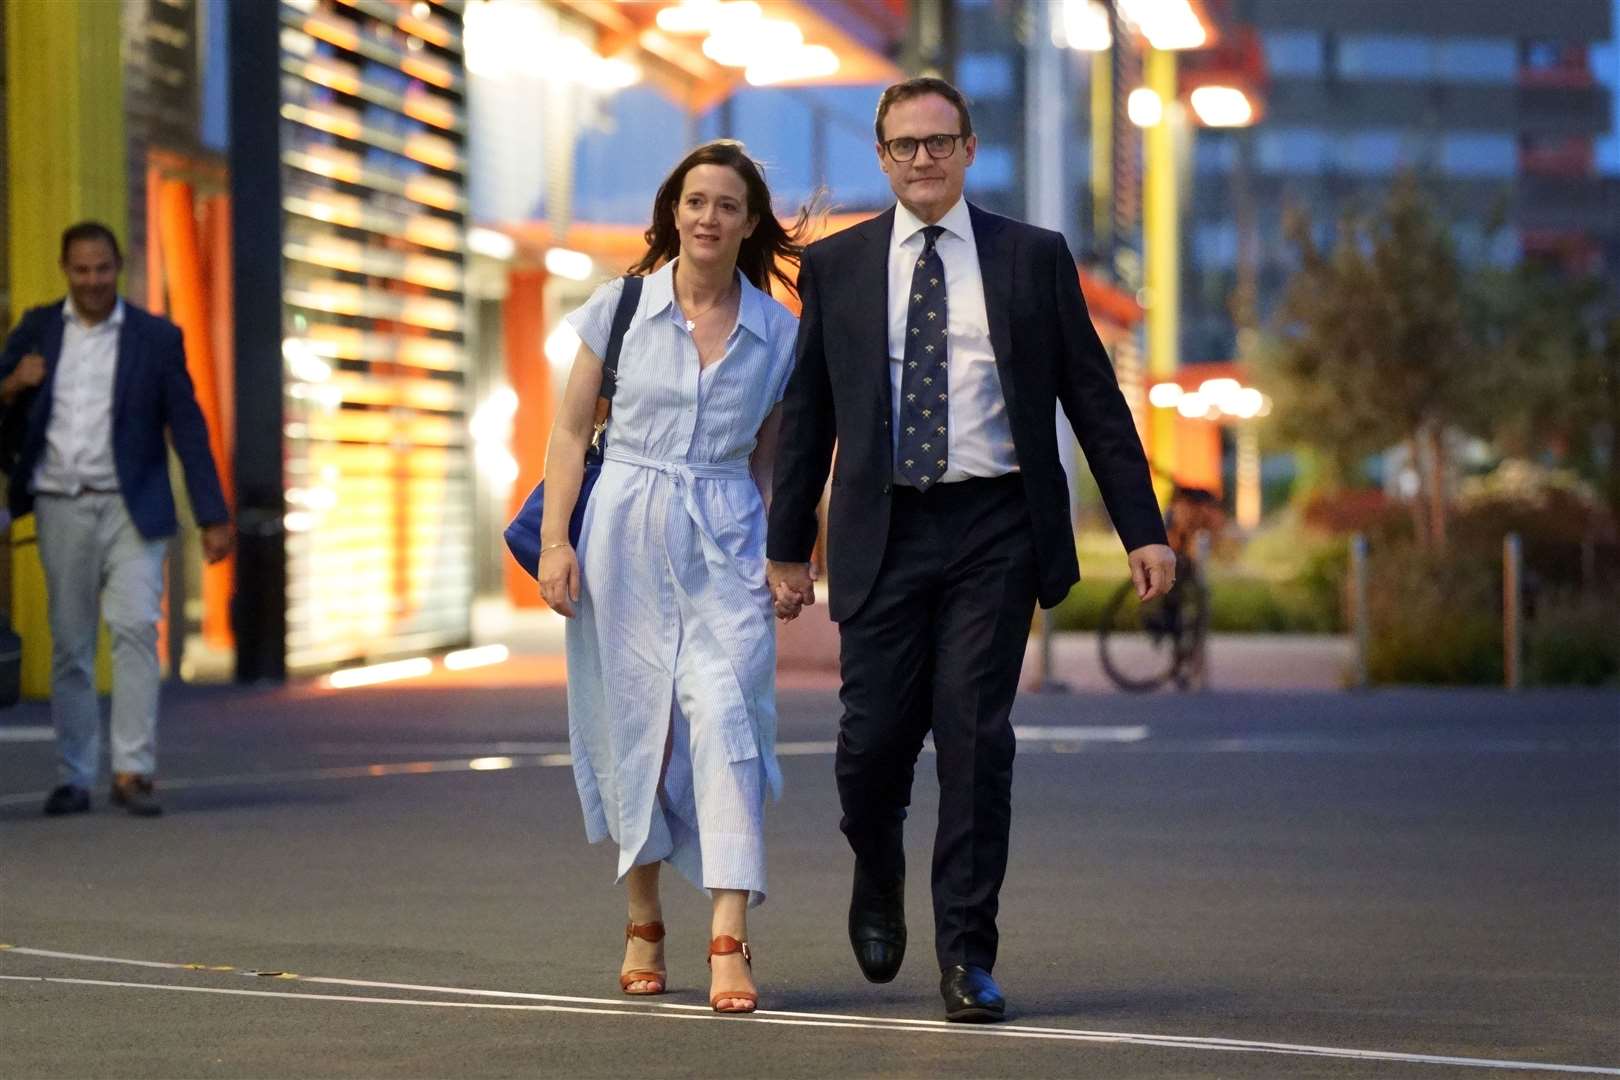 Tom Tugendhat leaving with his wife, Anissia, following the first TV leadership debate (Victoria Jones/PA)